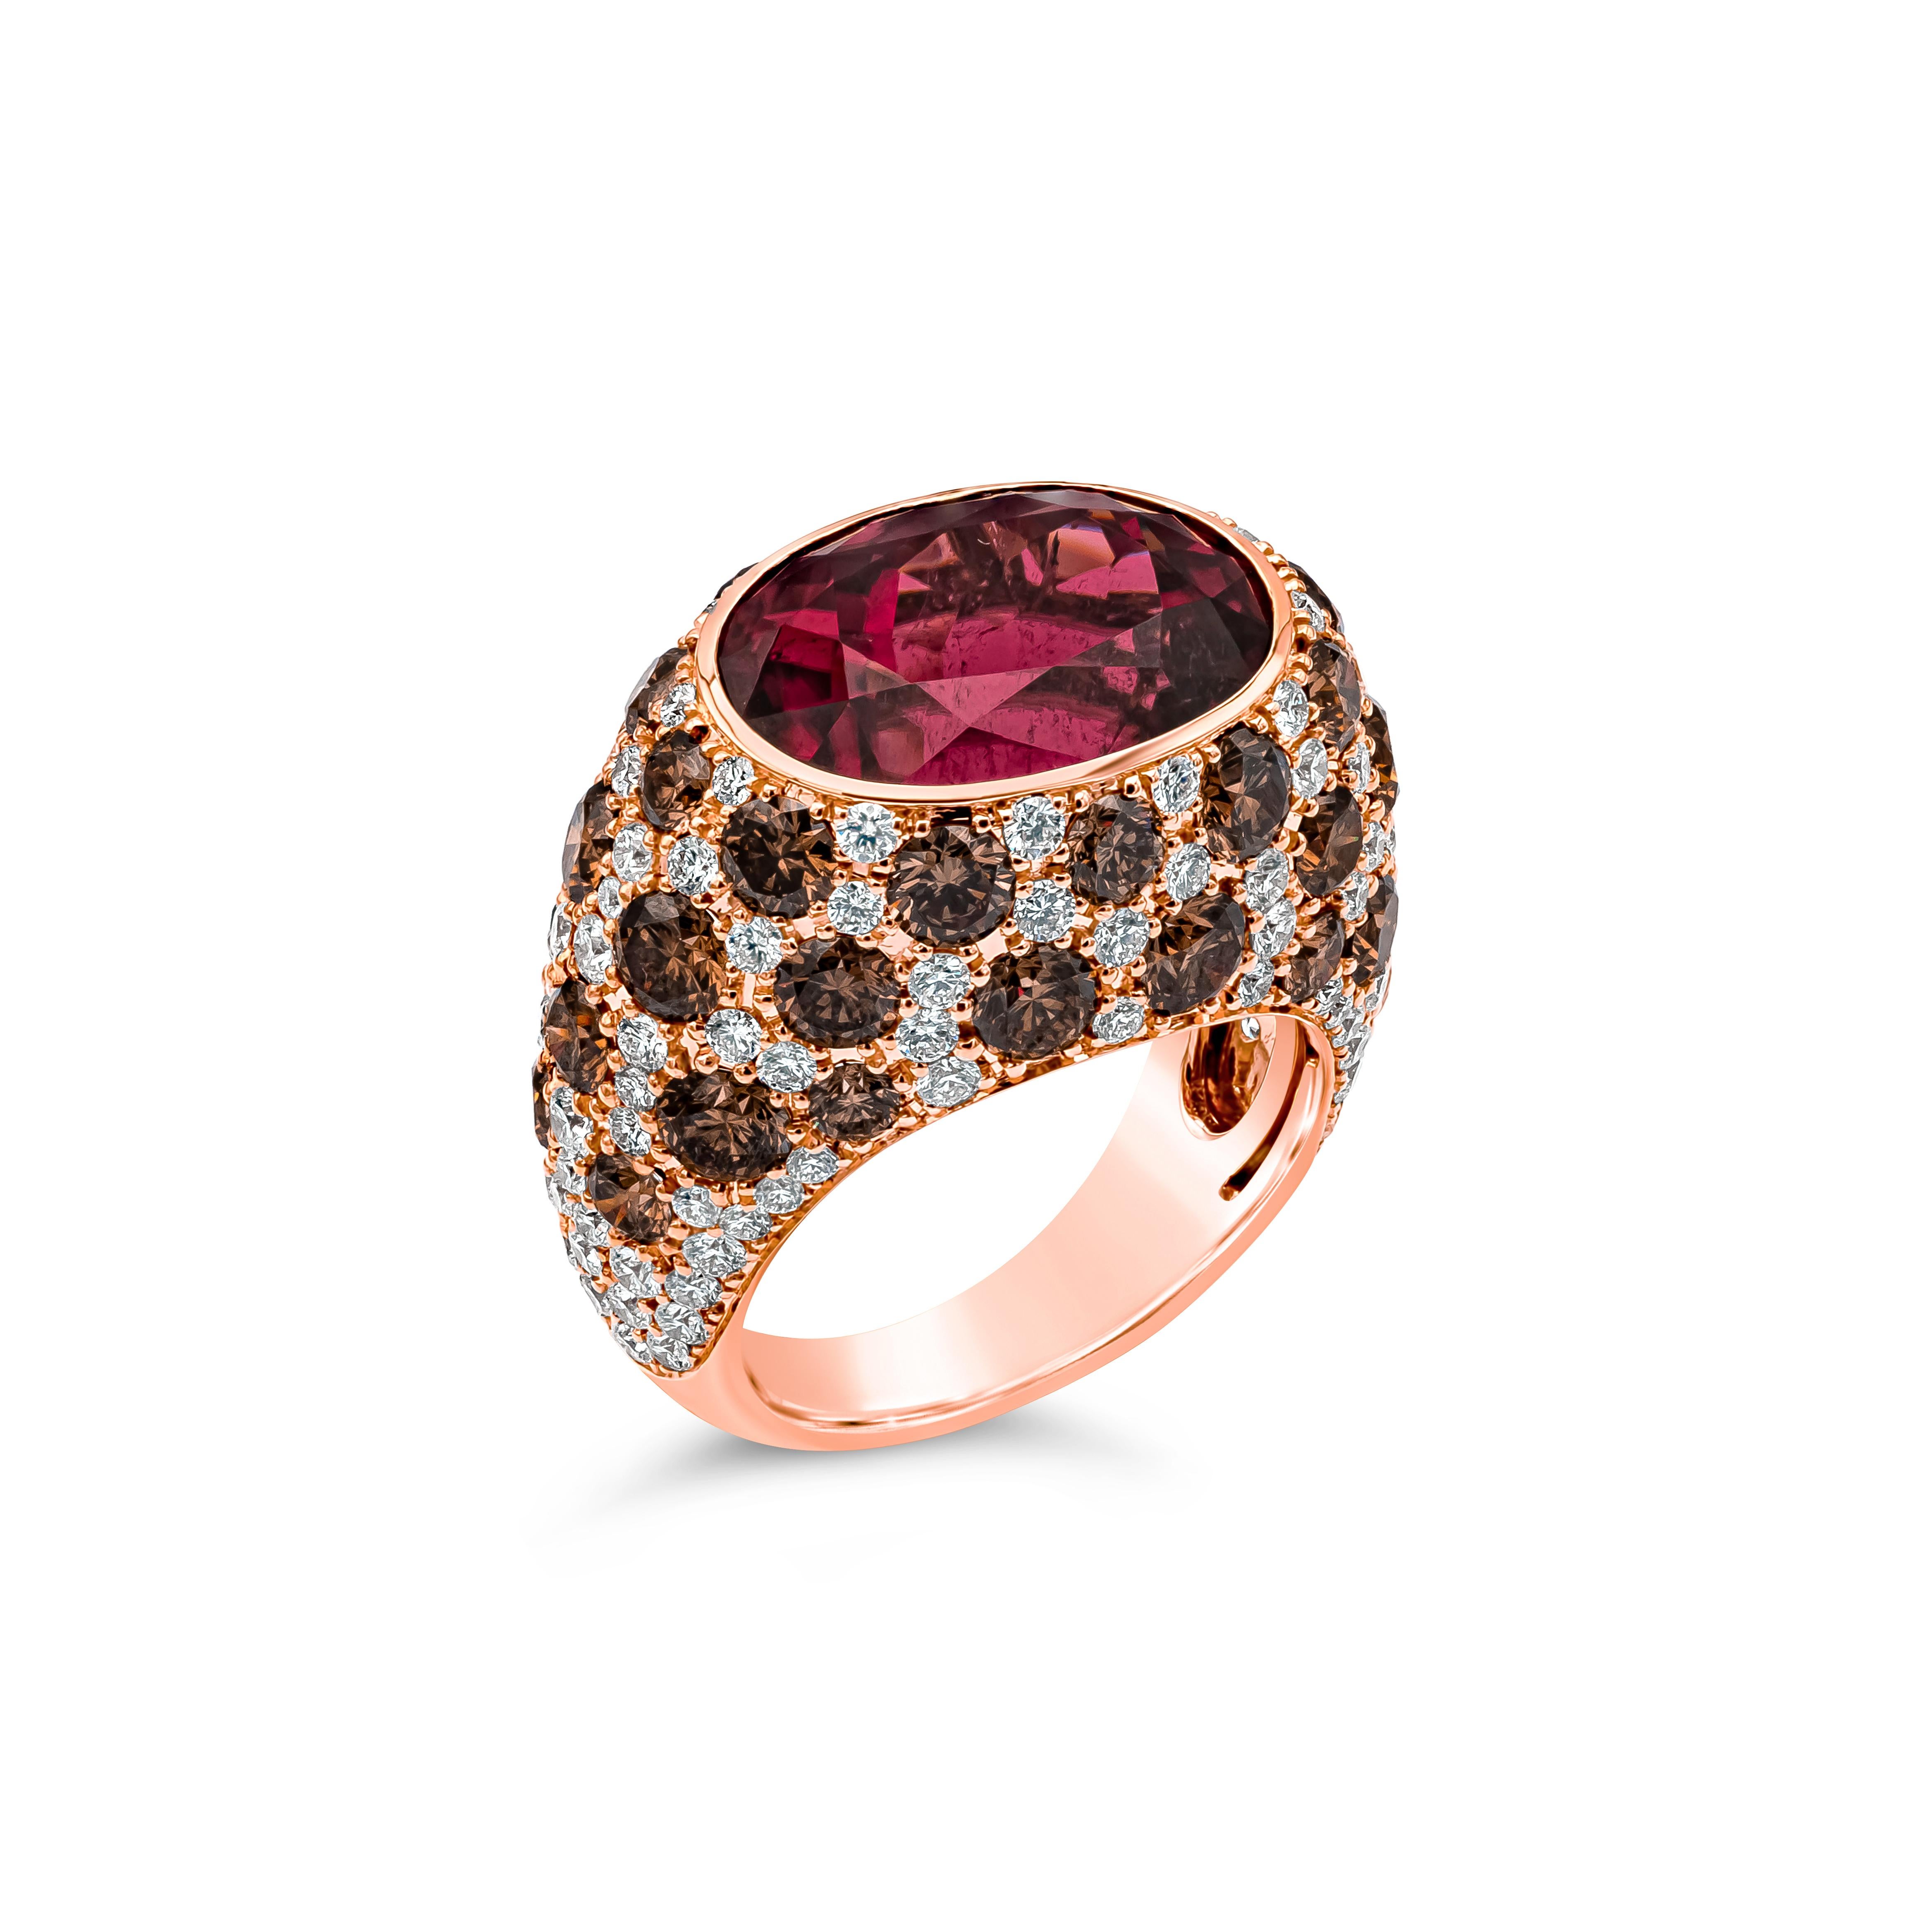 Roman Malakov 11.79 Carat Oval Cut Rubellite Tourmaline Dome Fashion Ring In New Condition For Sale In New York, NY